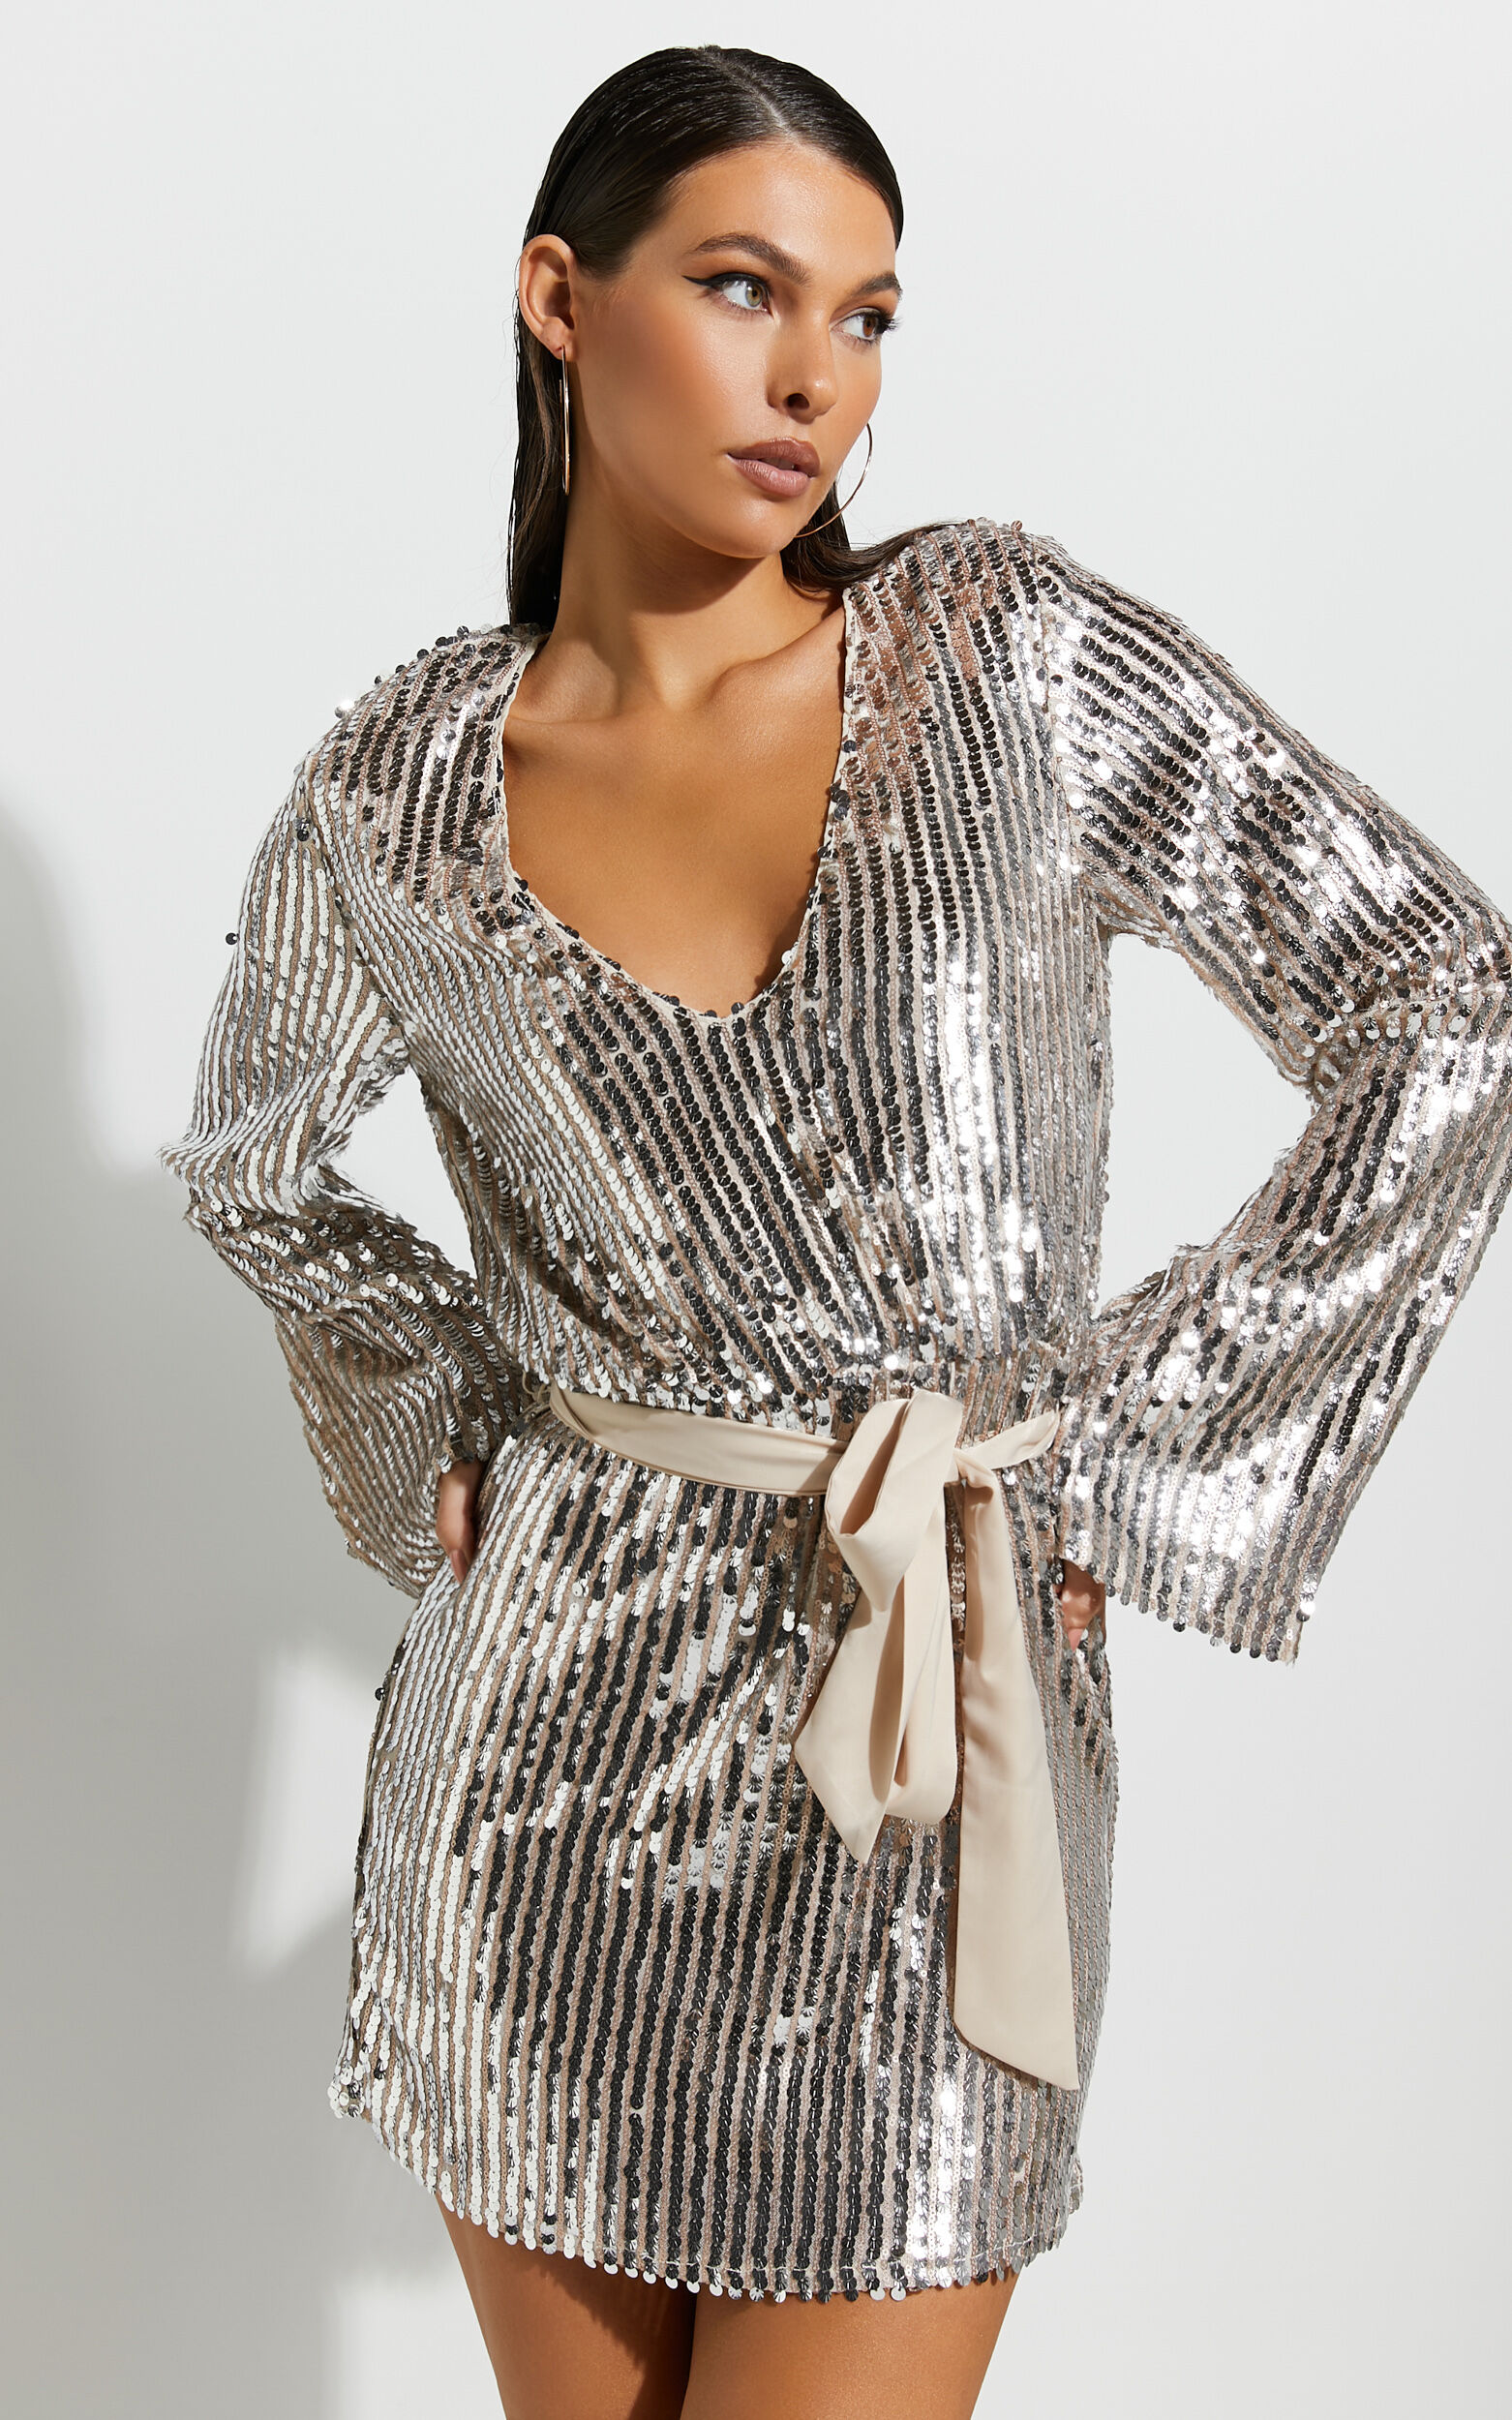 Shellanie Plunge Long Sleeve Mini Dress in Silver and Gold Sequin - 06, BLK1, super-hi-res image number null